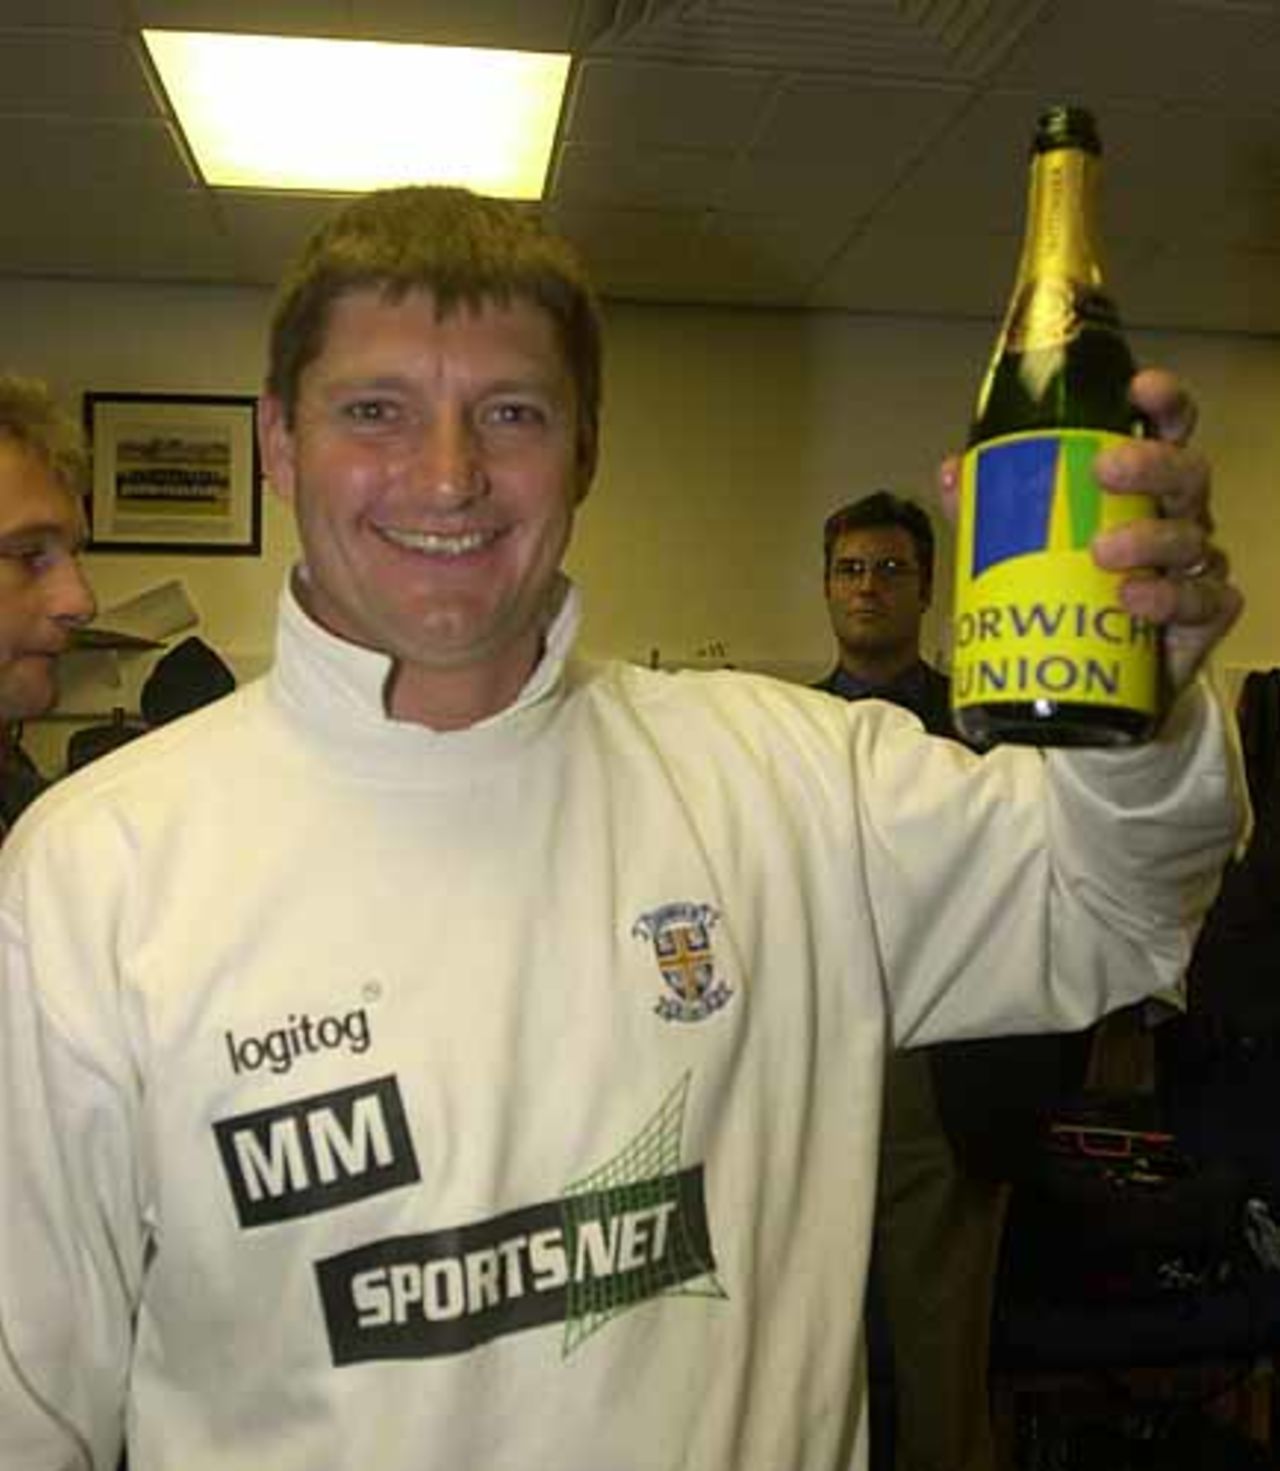 Durham coach Martyn Moxon holds aloft the bubbly after Durham win promotion to Division One of the Norwich Union League